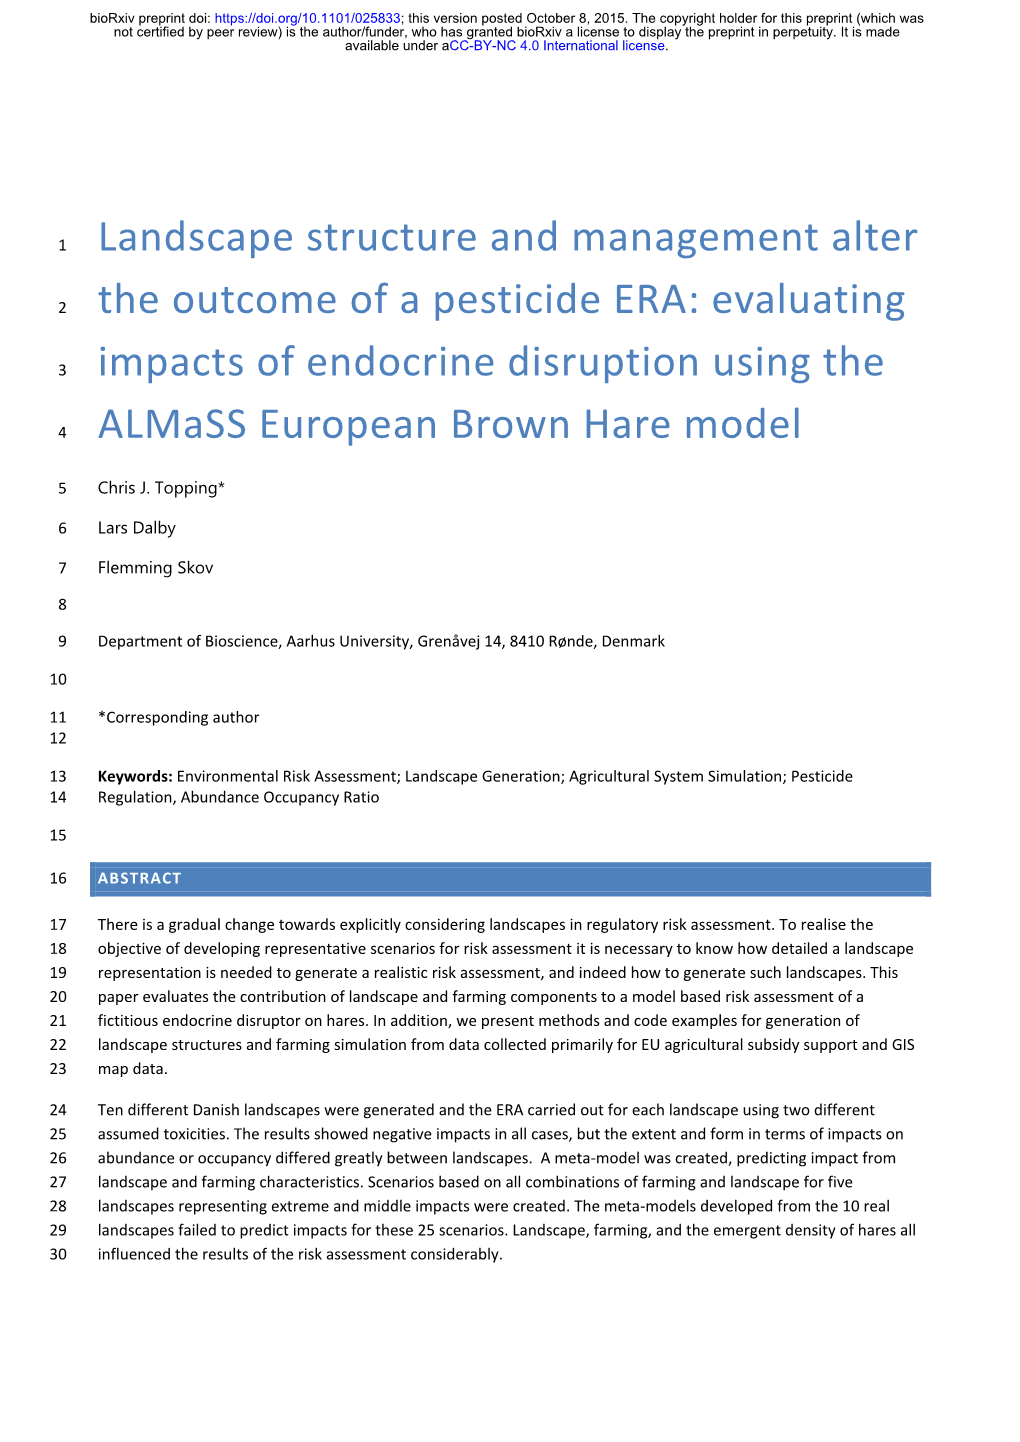 Landscape Structure and Management Alter the Outcome of a Pesticide ERA: Evaluating an Endocrine Disruptor Using the Almass European Brown Hare Model